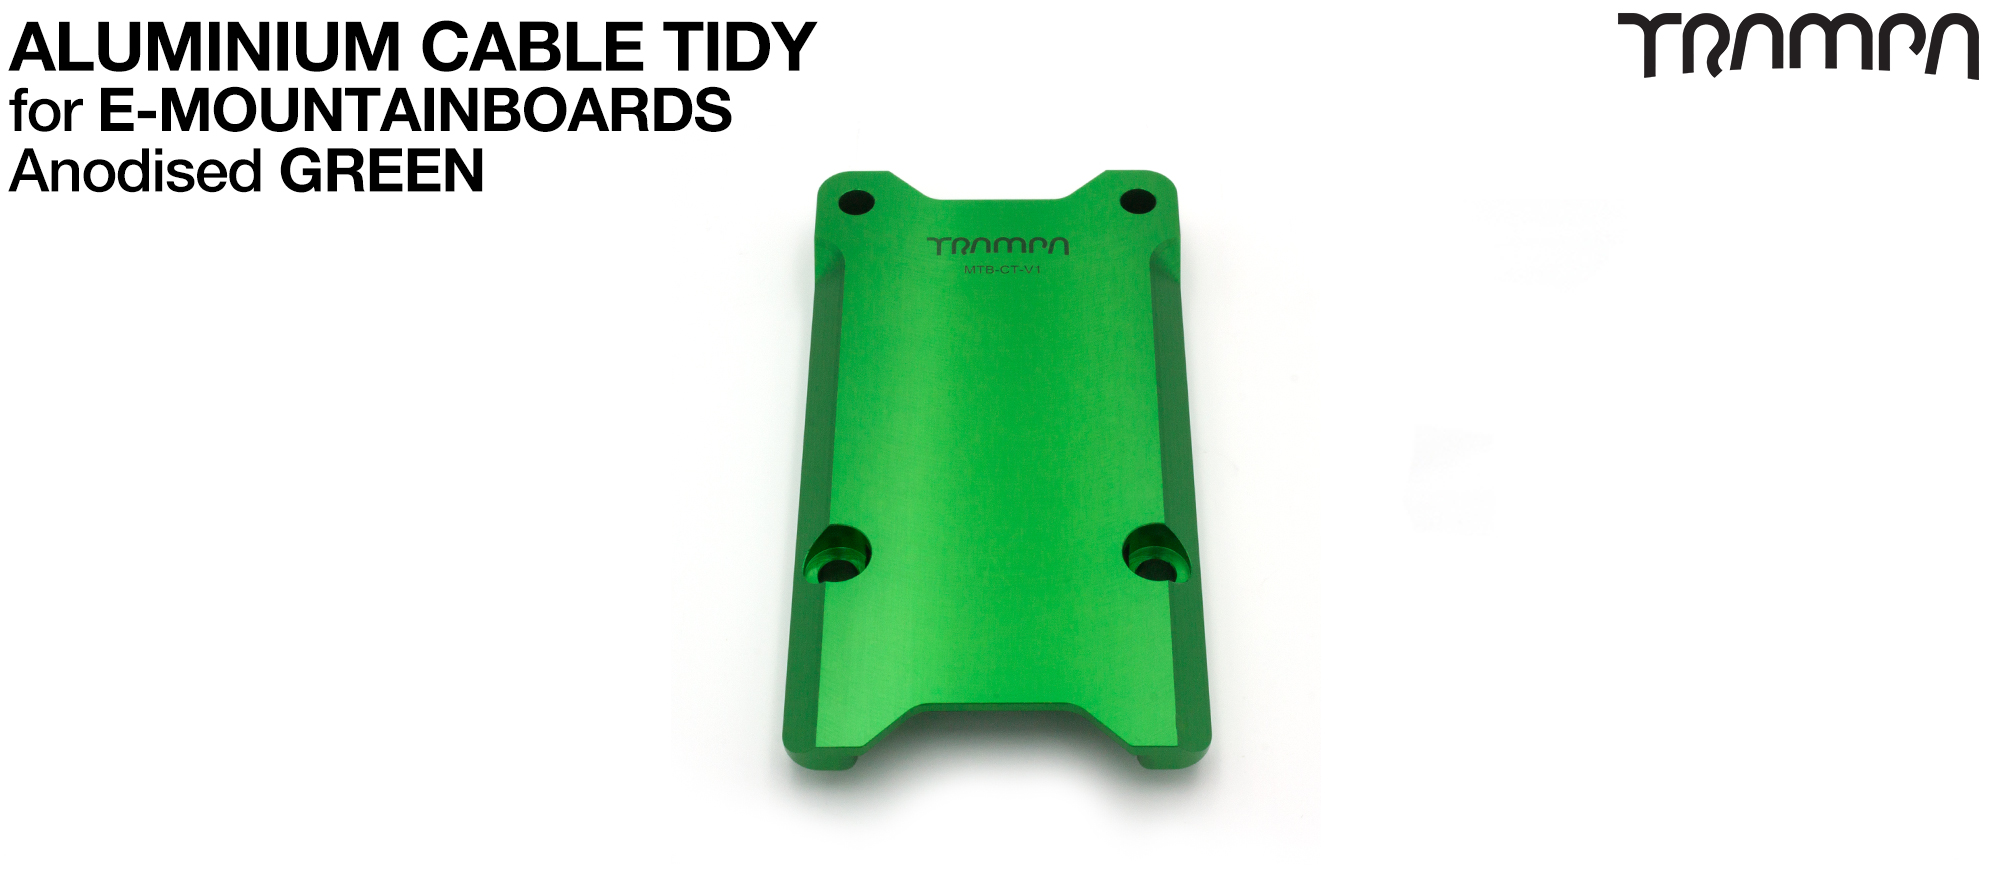 Anodised Aluminum Cable Tidy - GREEN